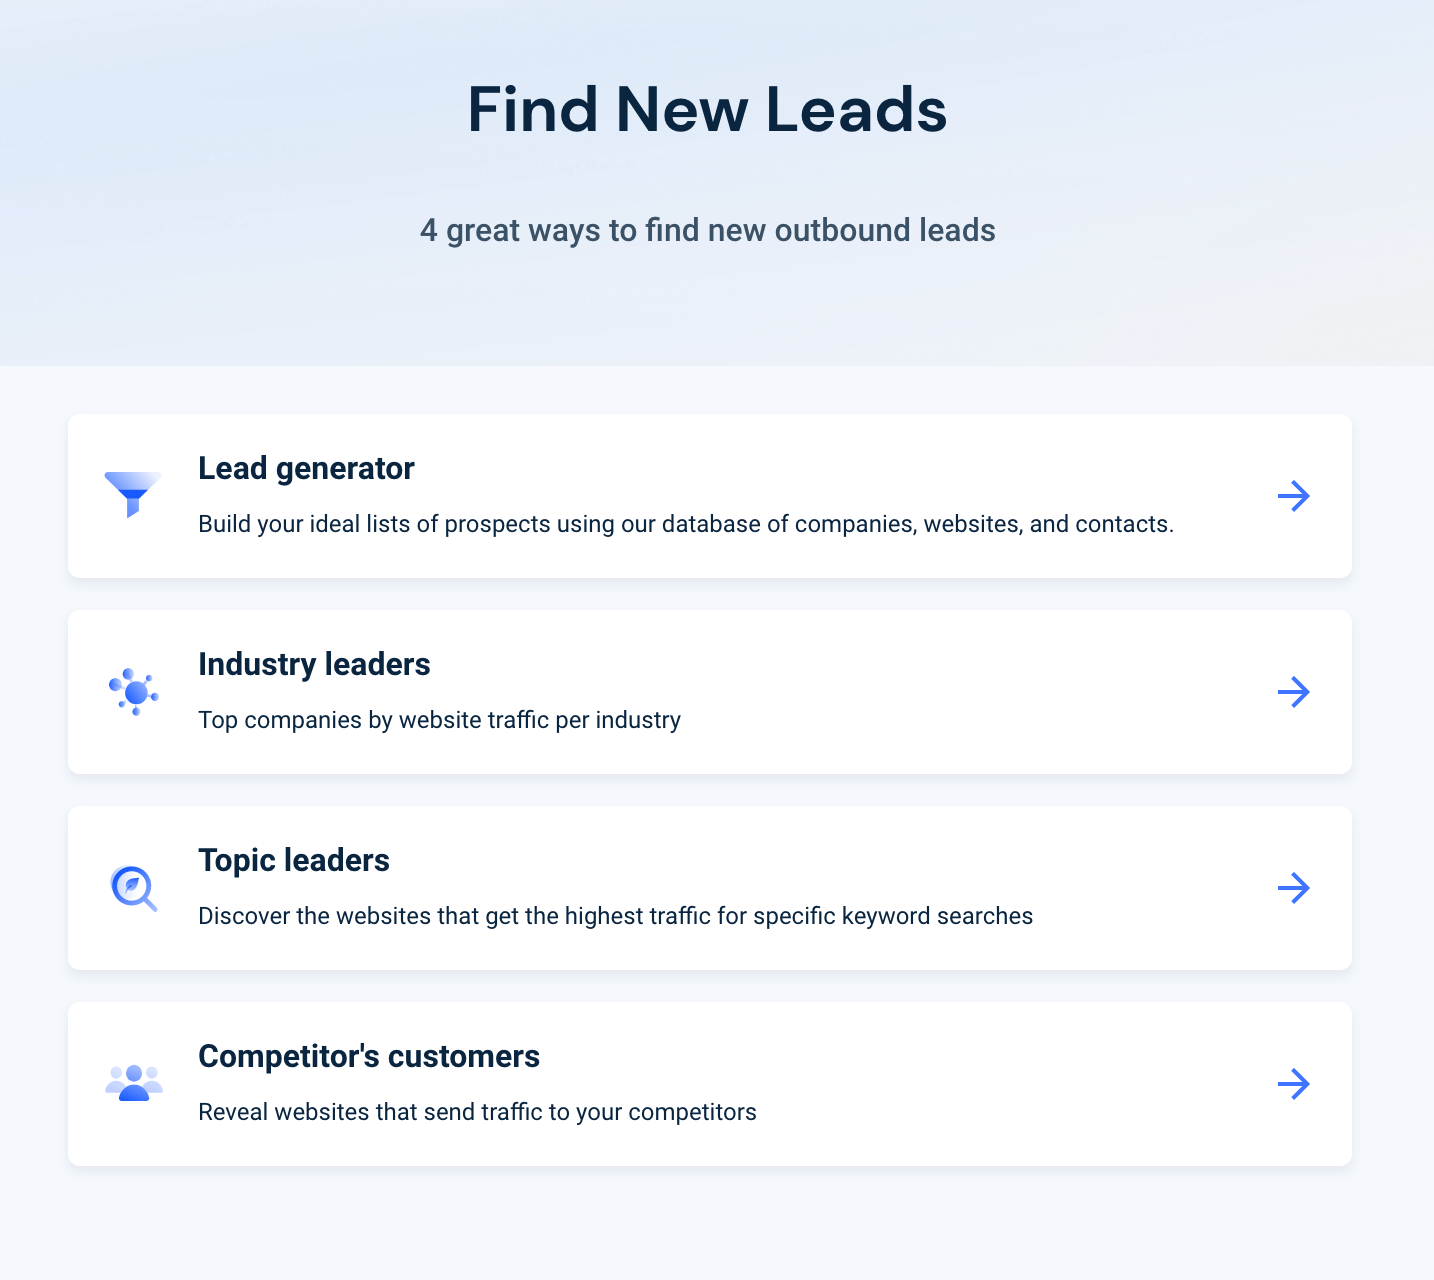 Find new leads in four ways with Similarweb Lead Generation Too.